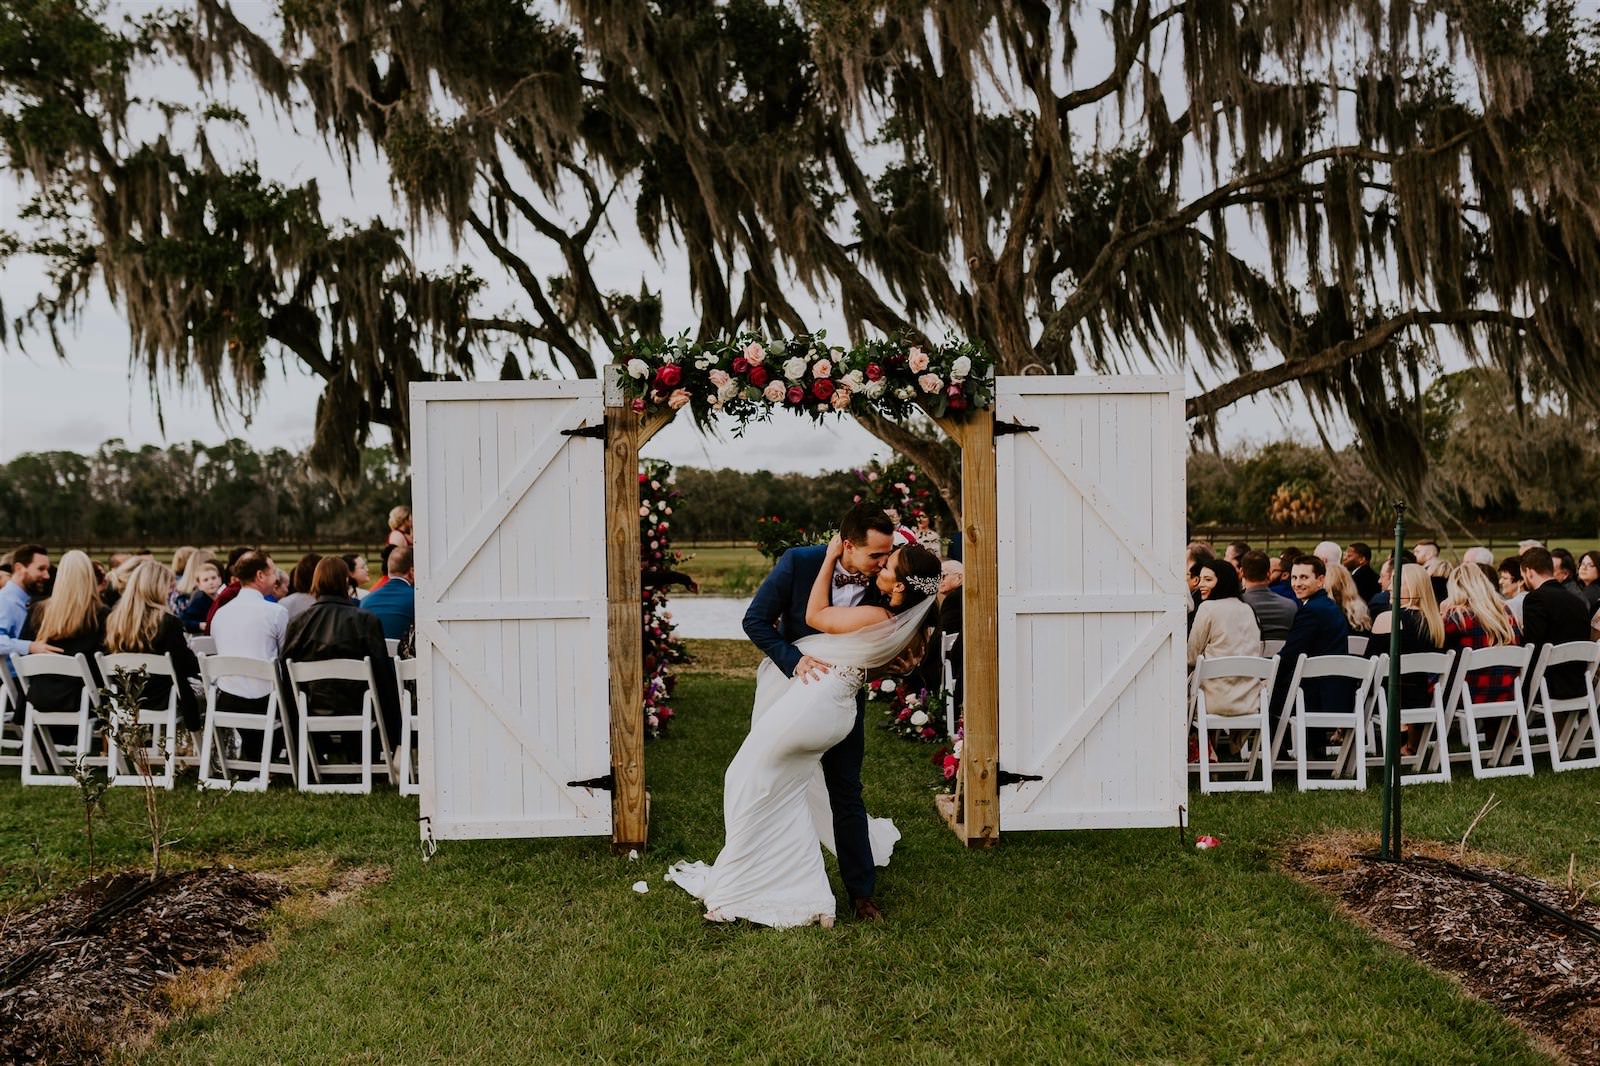 Bride and Groom Ceremony Exit Dip Kiss | Rustic Tampa Outdoor Oak Tree Wedding Ceremony with White Garden Chairs | Wedding Barn Doors Entrance with Floral Garland | Tampa Wedding Florist Monarch Events and Designs | Deep Red Maroon Burgundy Roses and Blush Pink and White Roses with Eucalyptus Greenery